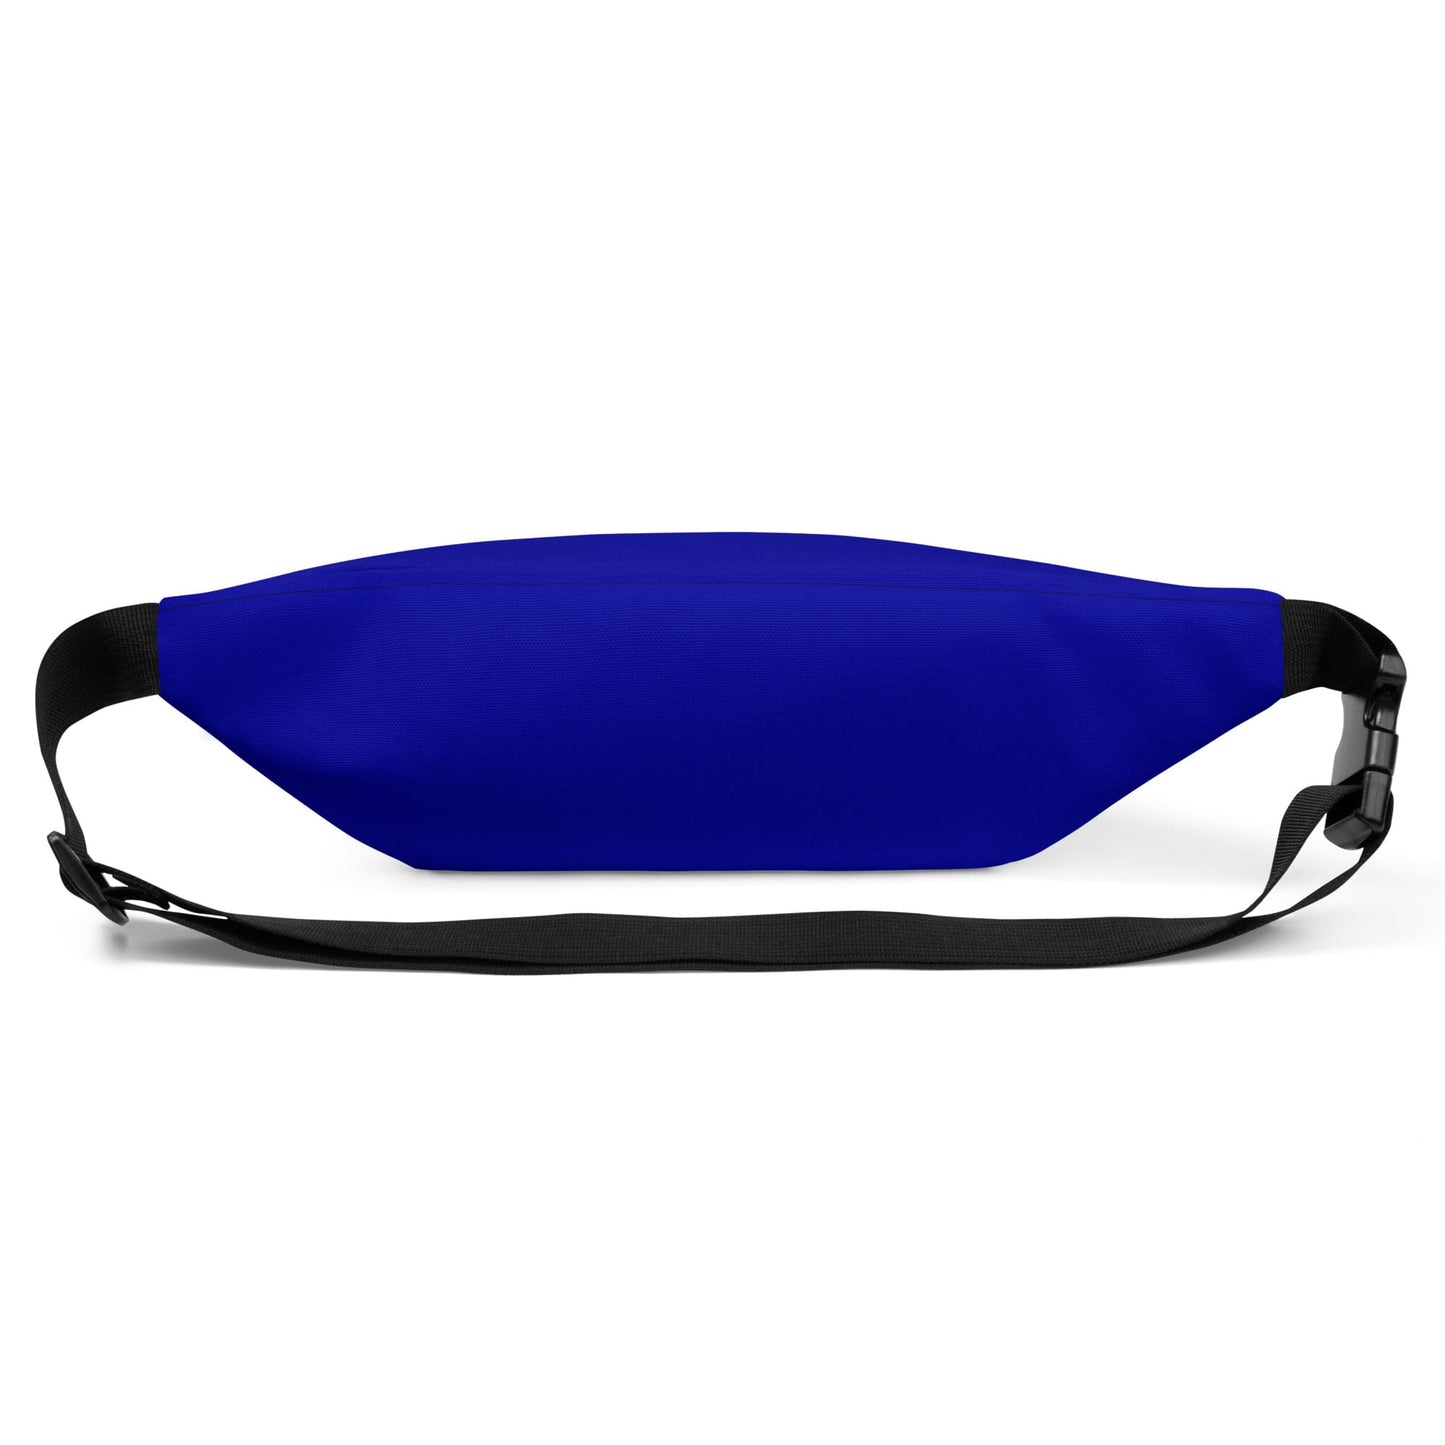 puppy play pride fanny pack, back